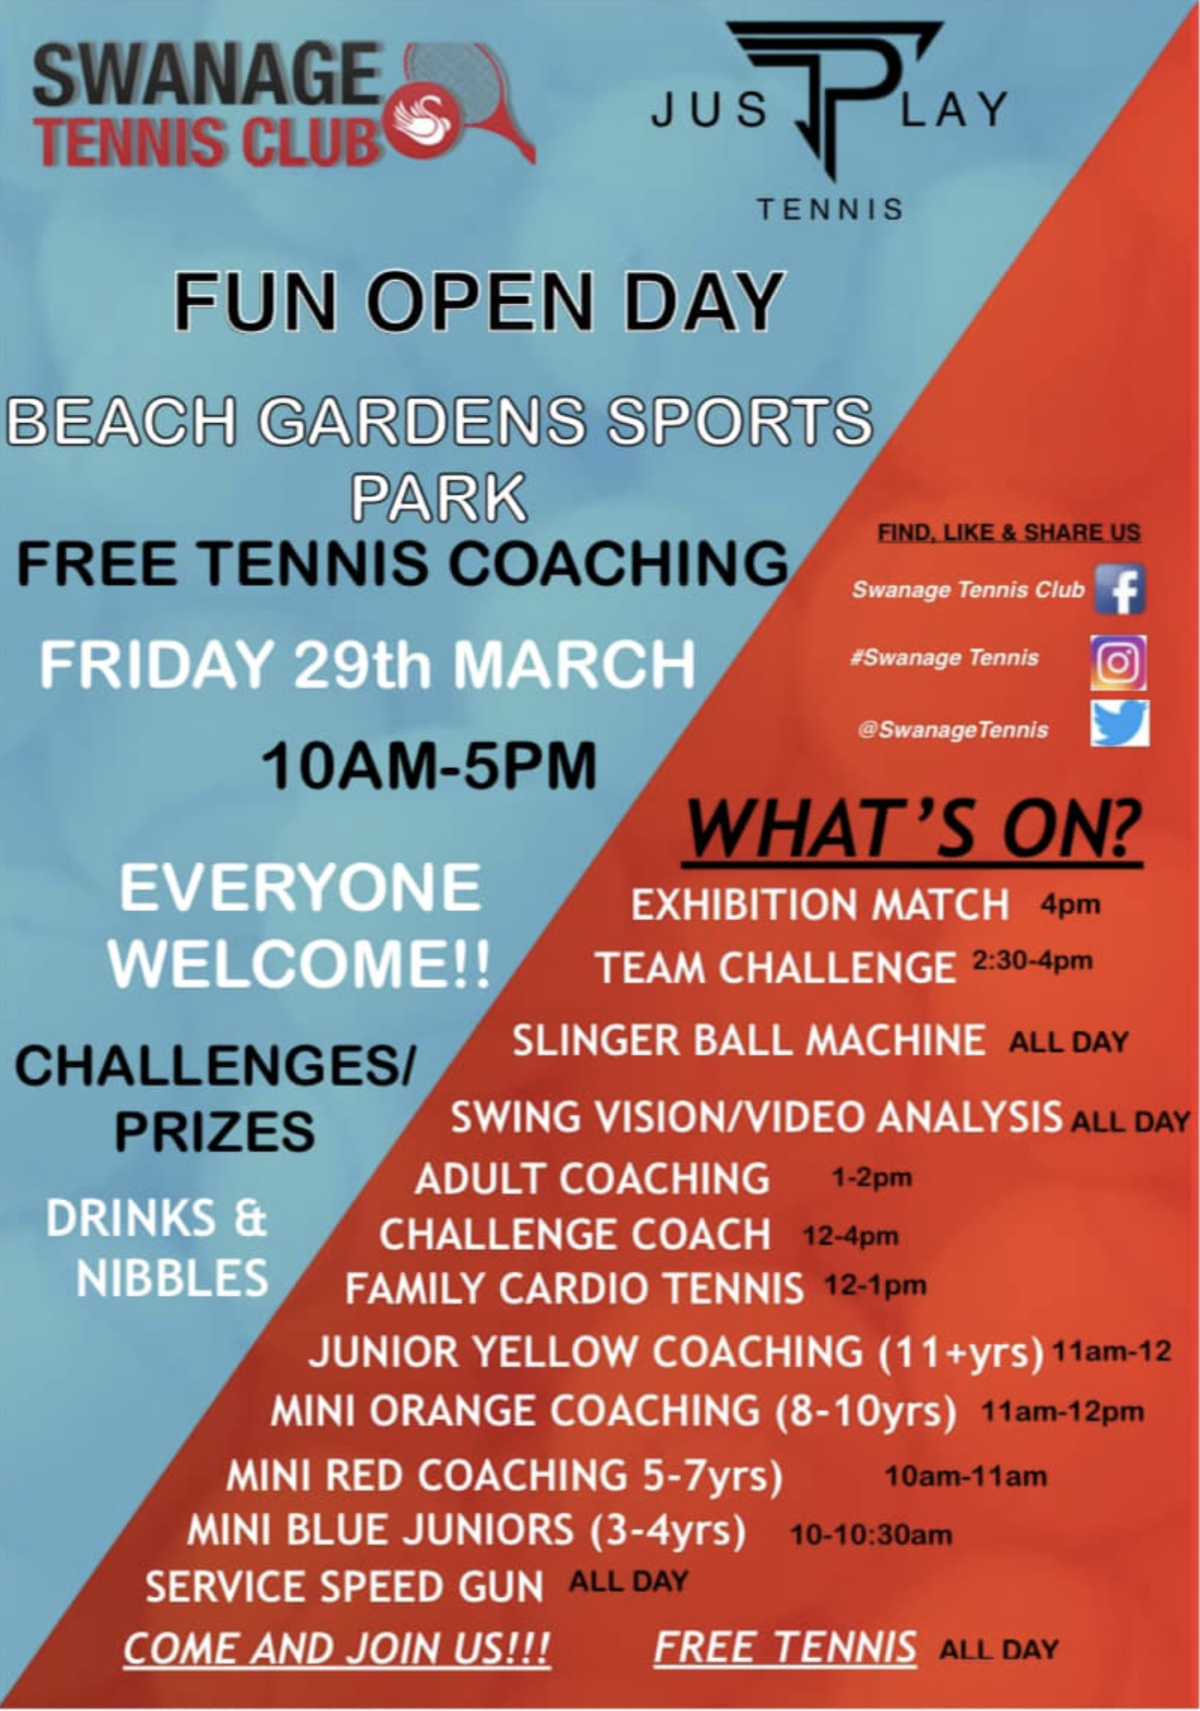 Swanage Tennis Club open day flyer